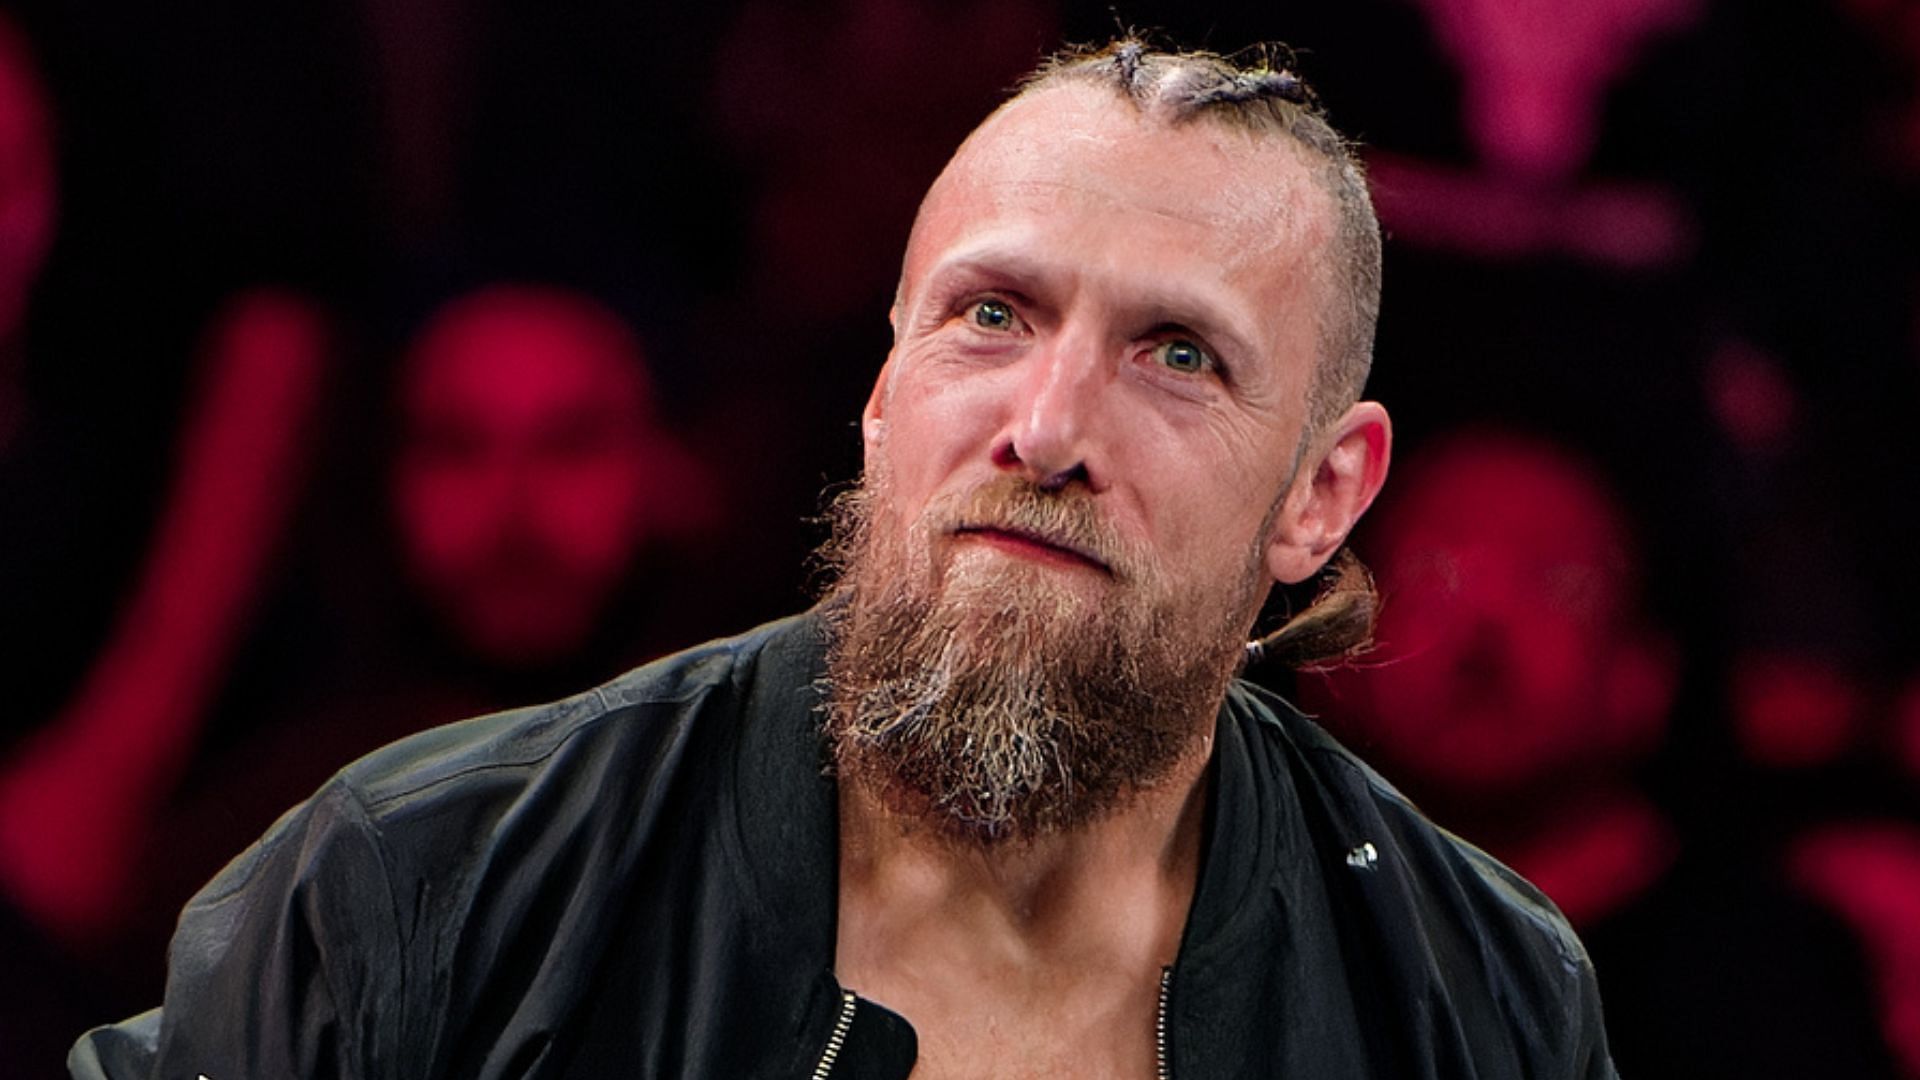 A former WWE Superstar has some strong words for Bryan Danielson